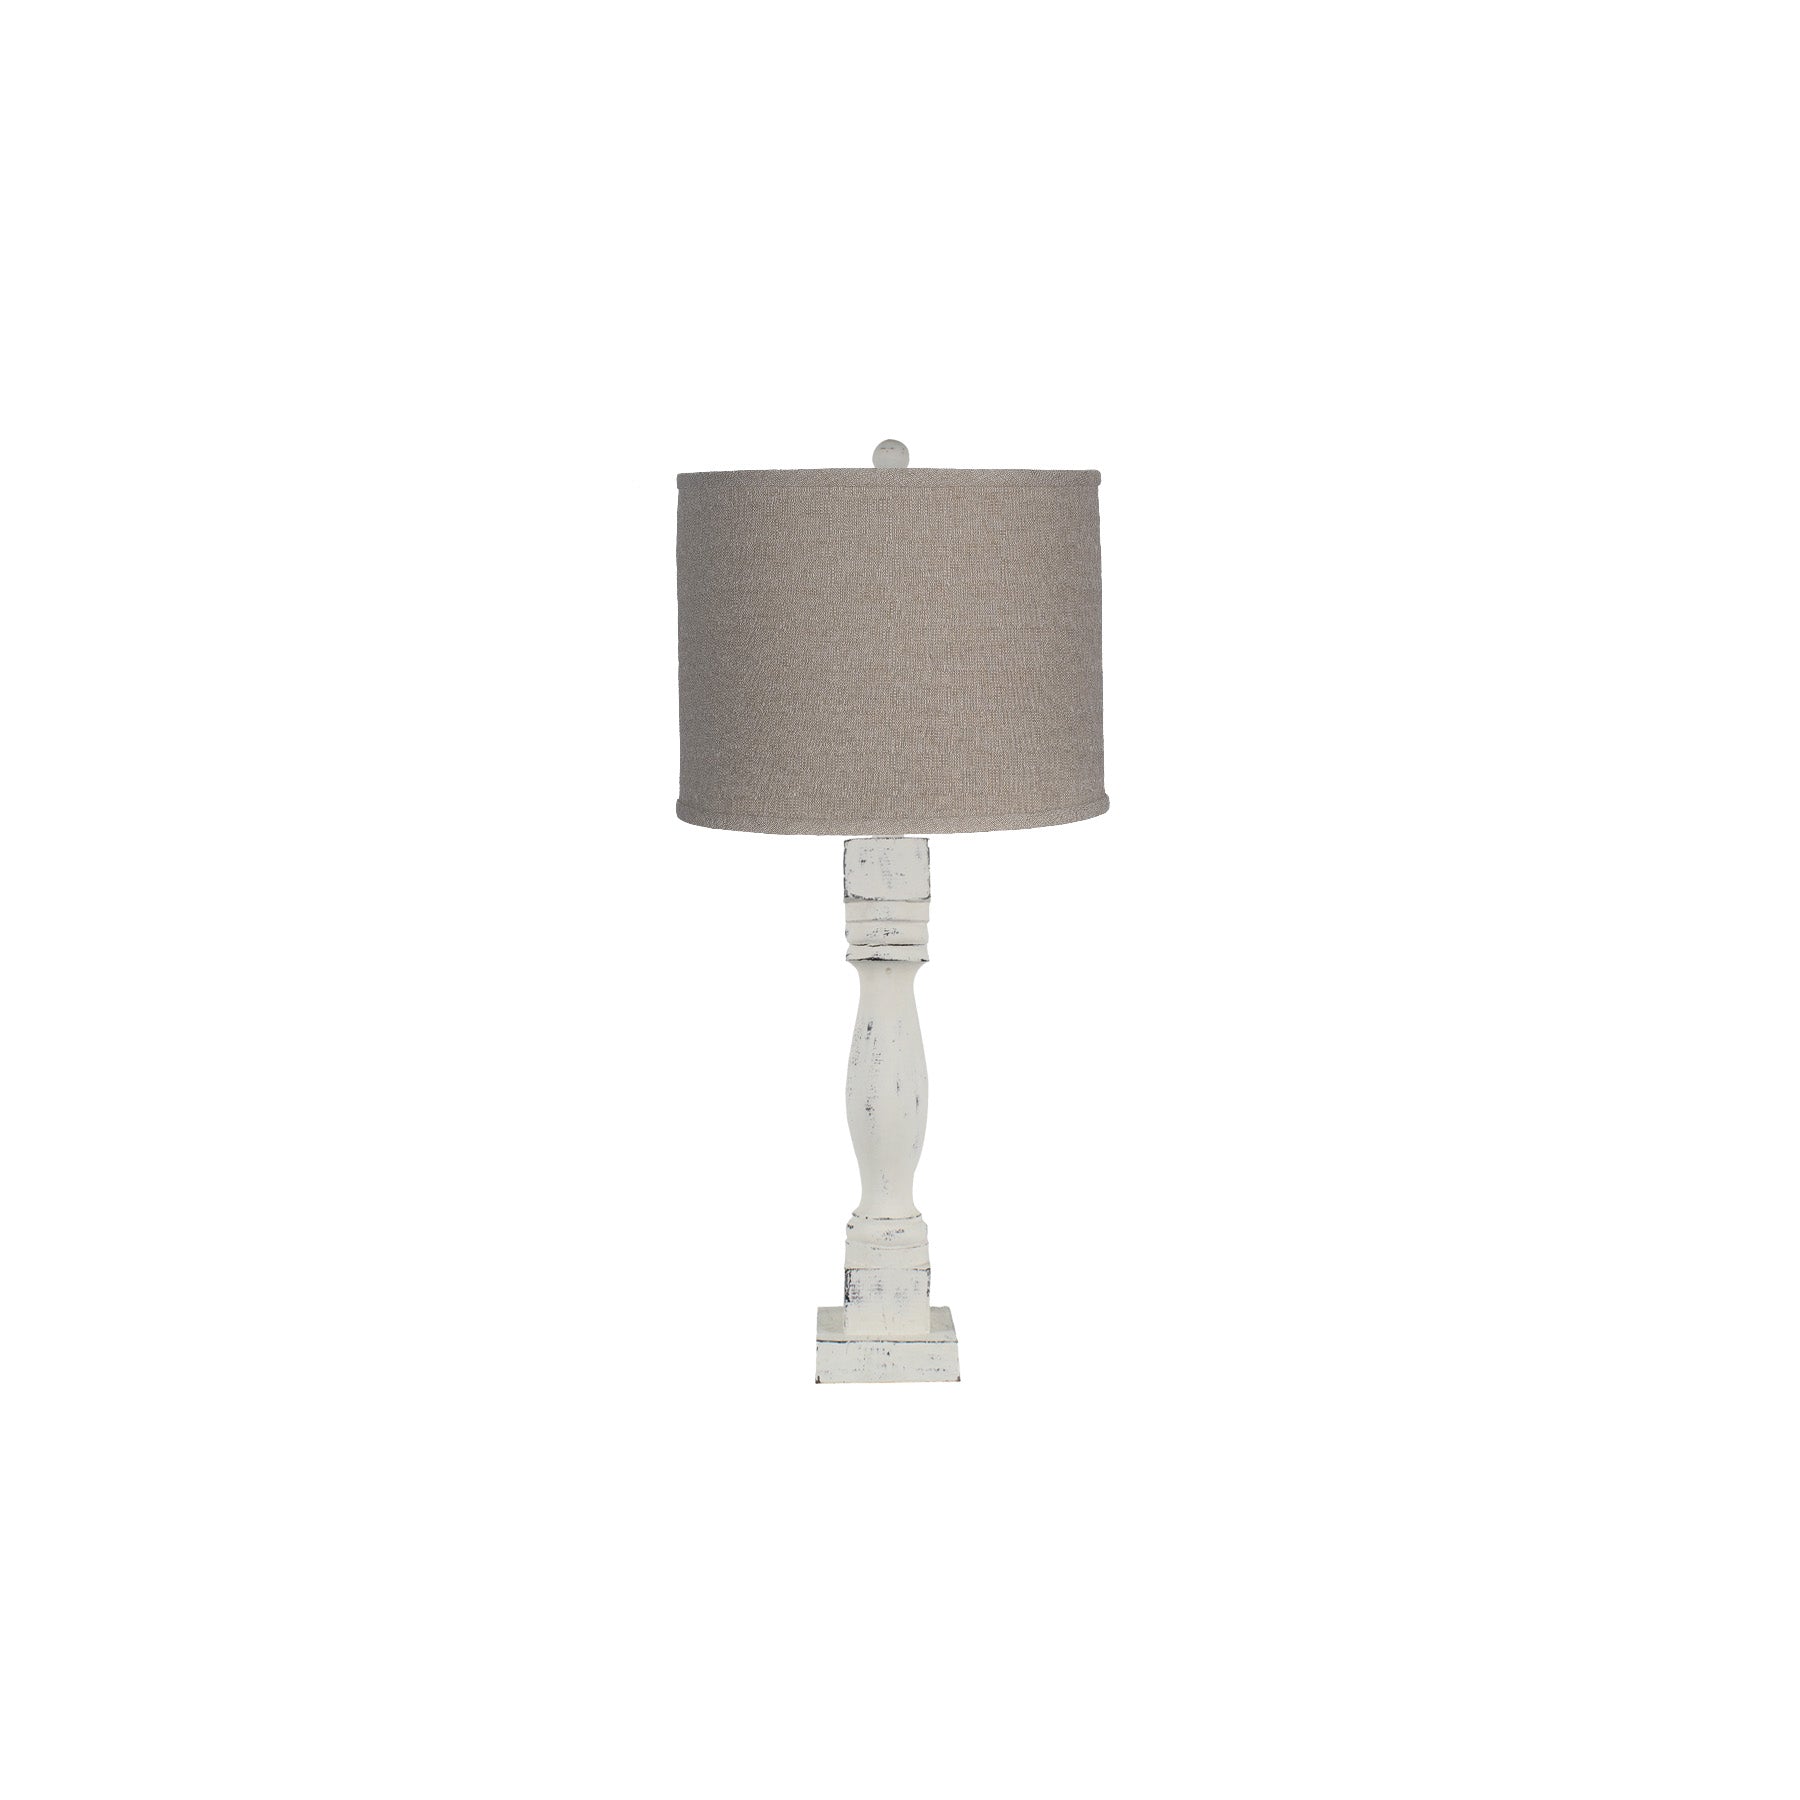 Distressed-White-Table-Lamp-With-Neutral-Fabric-Shade-Table-Lamps